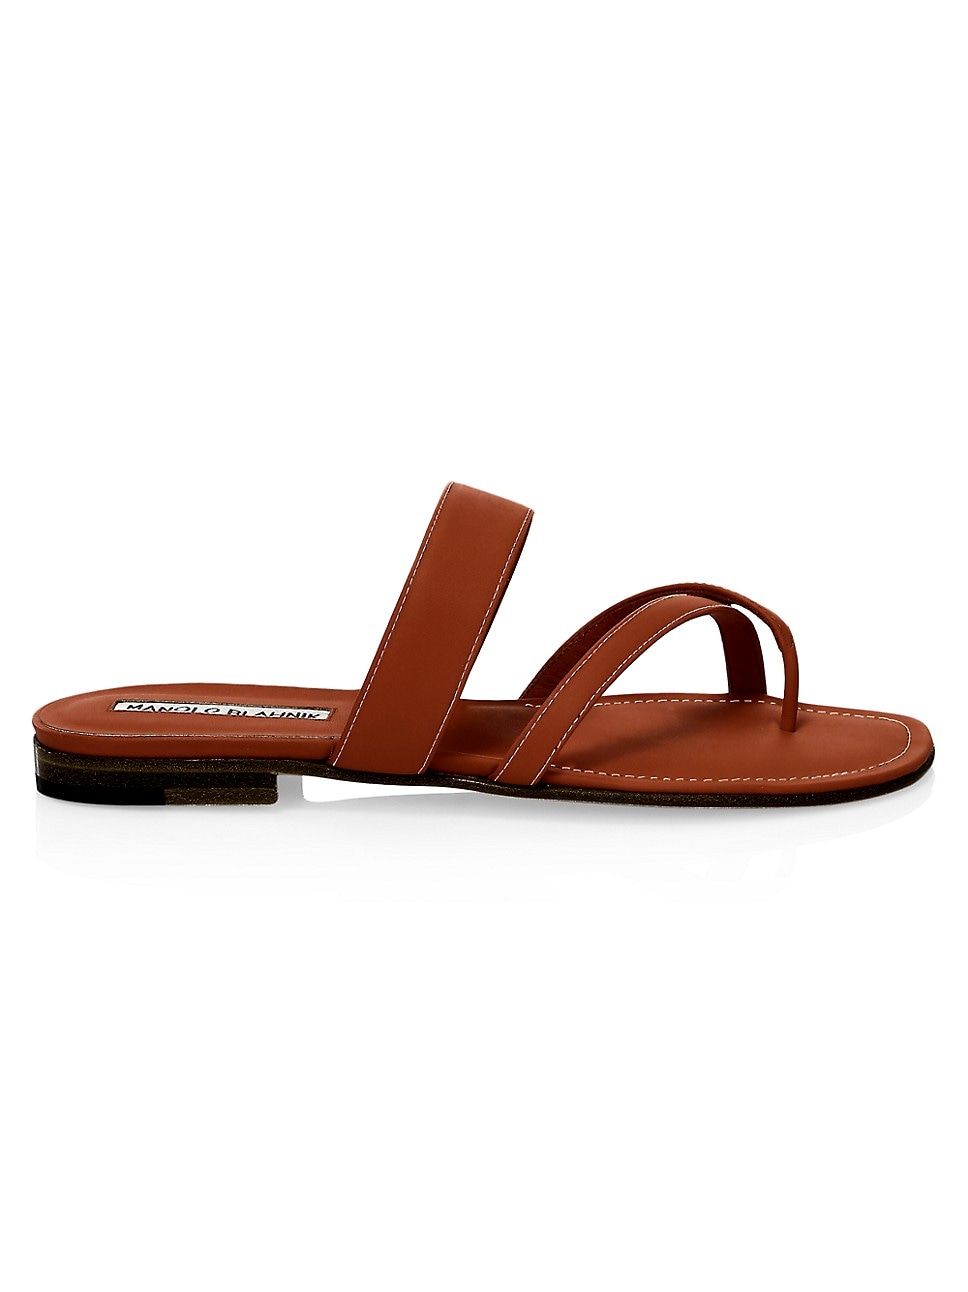 Susa Leather Thong Sandals | Saks Fifth Avenue